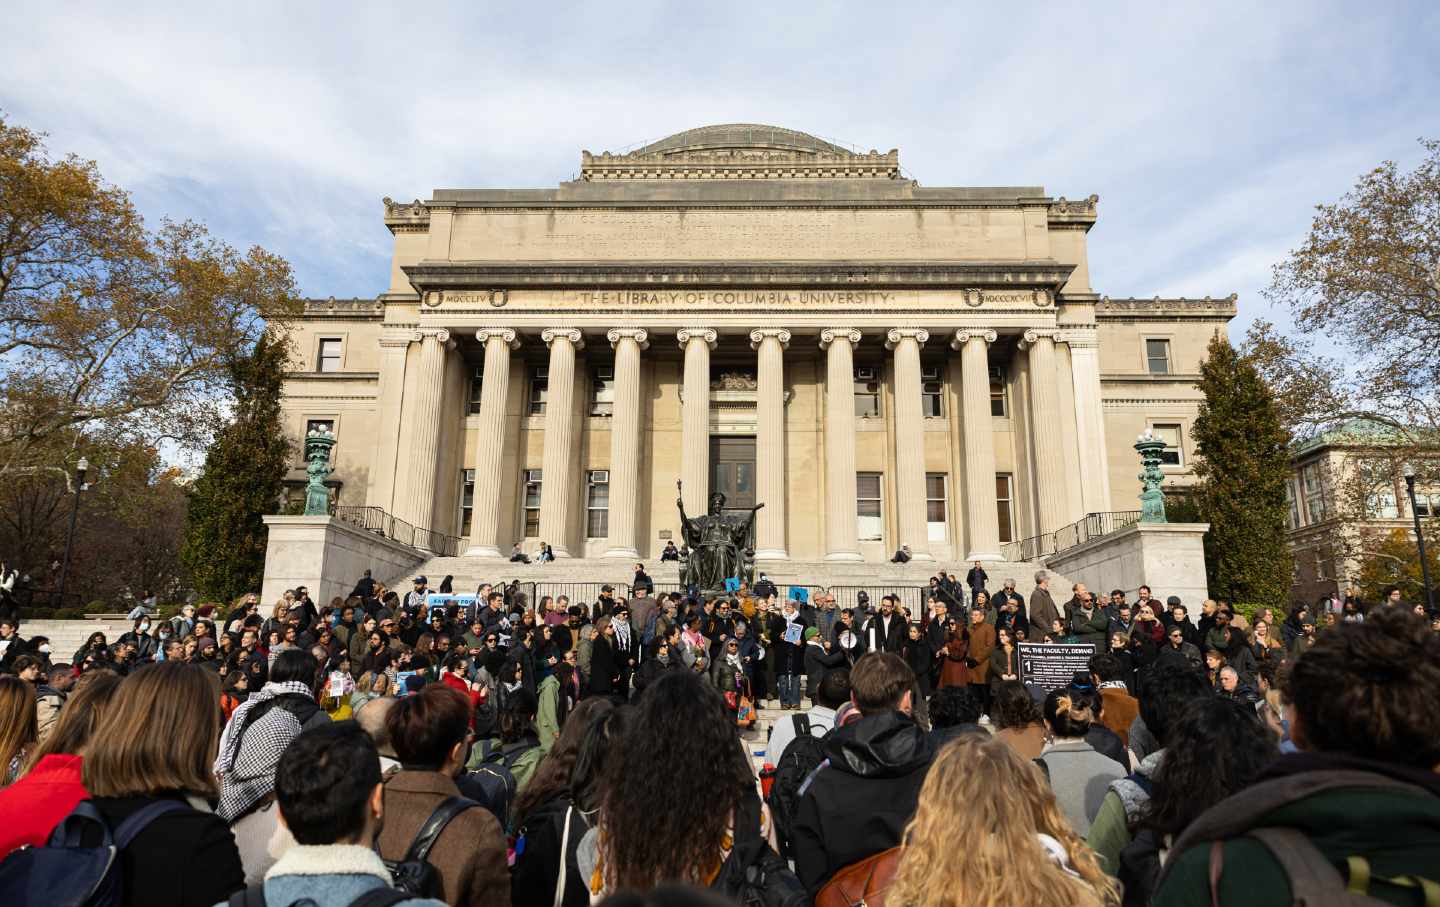 A crowd of students stands in front of a library at Columbia University protesting the university's decision to suspend two student groups